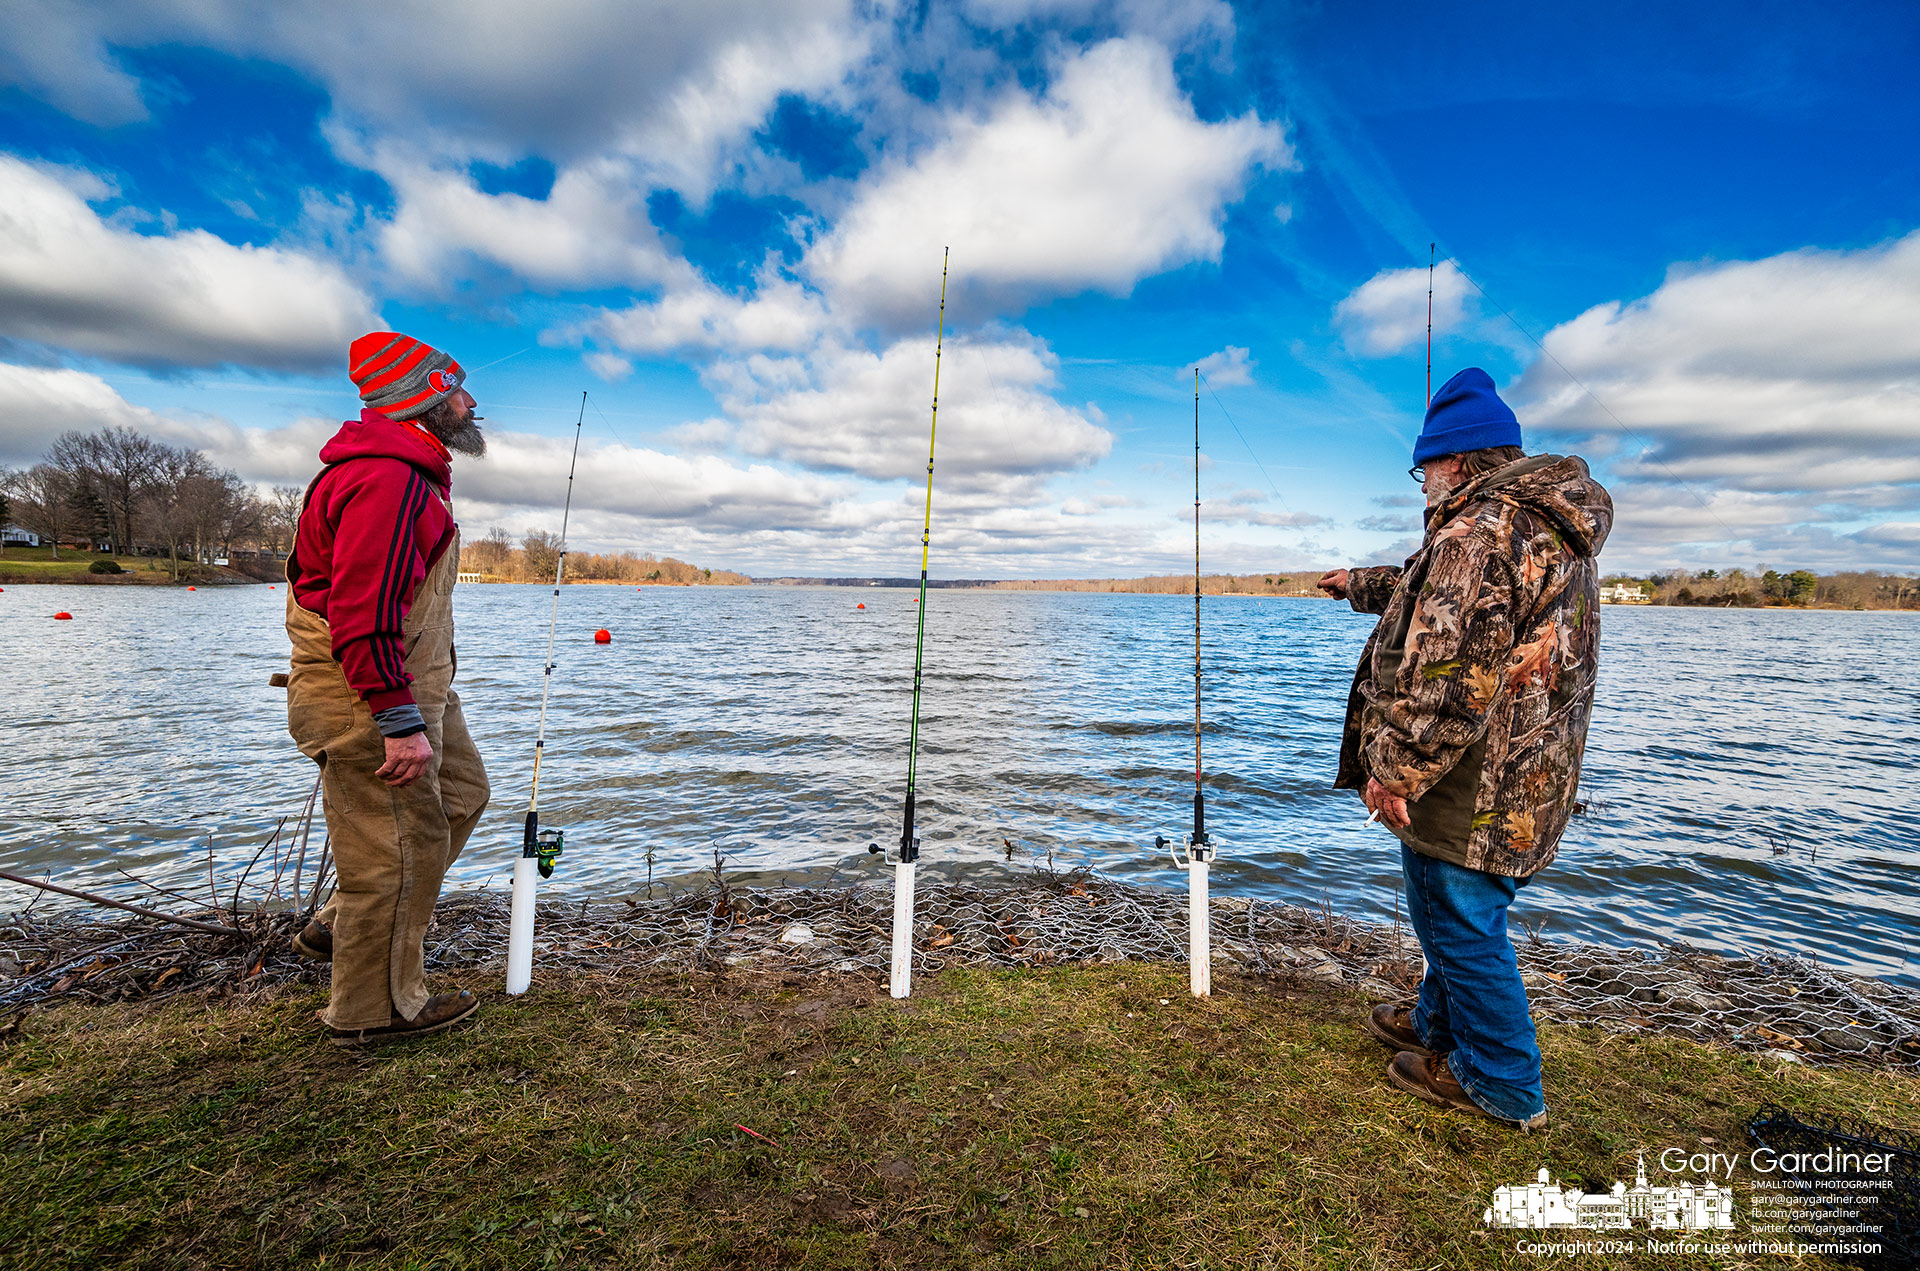 Jessie and Mark attend their rods with lines tossed into Hoover Reservoir in hopes of retrieving large catfish on a chilly and windy Friday afternoon.